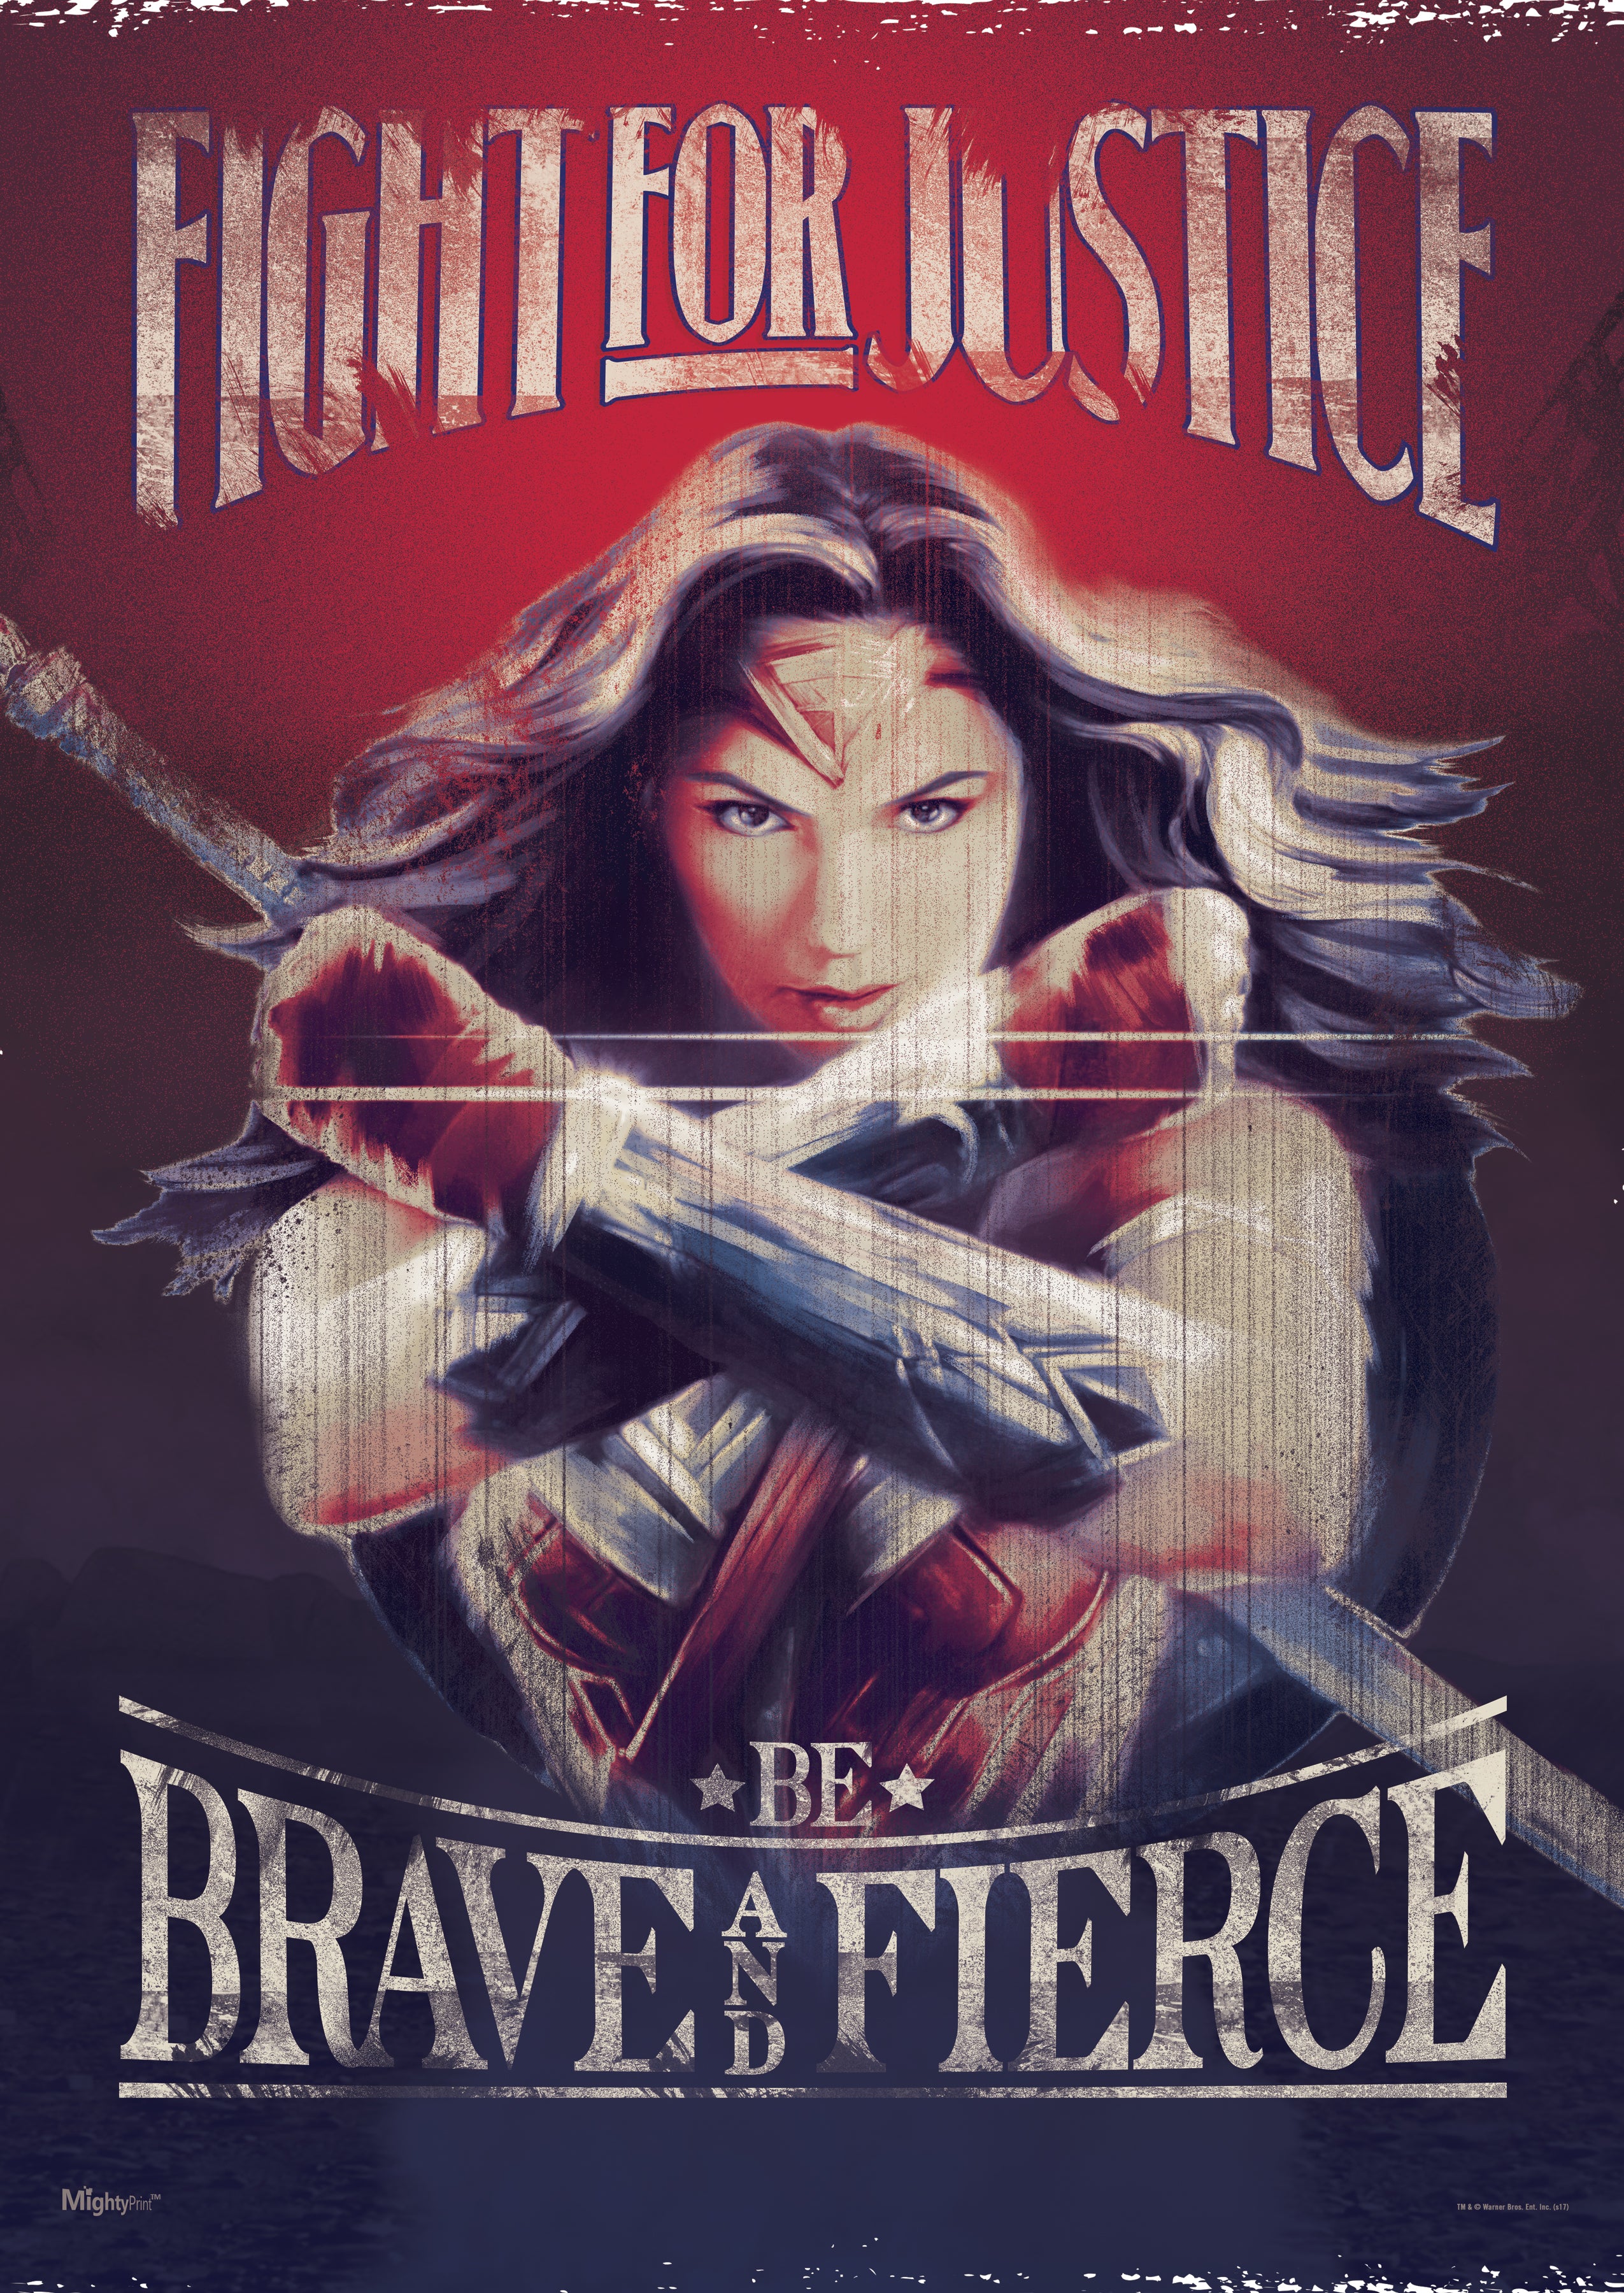 Wonder Woman (Fight for Justice) MightyPrint™ Wall Art MP17240303